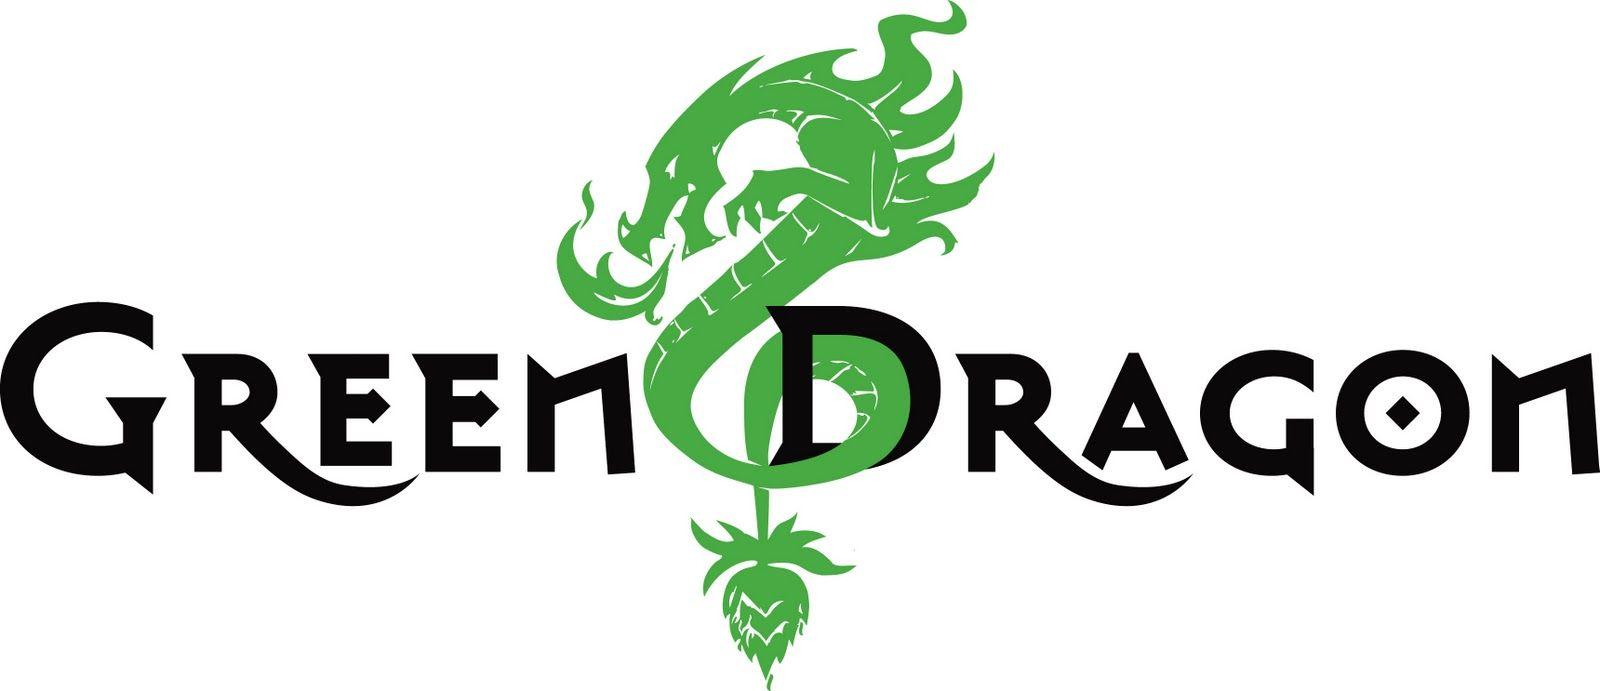 Green Dragon Logo - Green Dragon to Become Rogue East Side Pub & Pilot Brewery - New ...